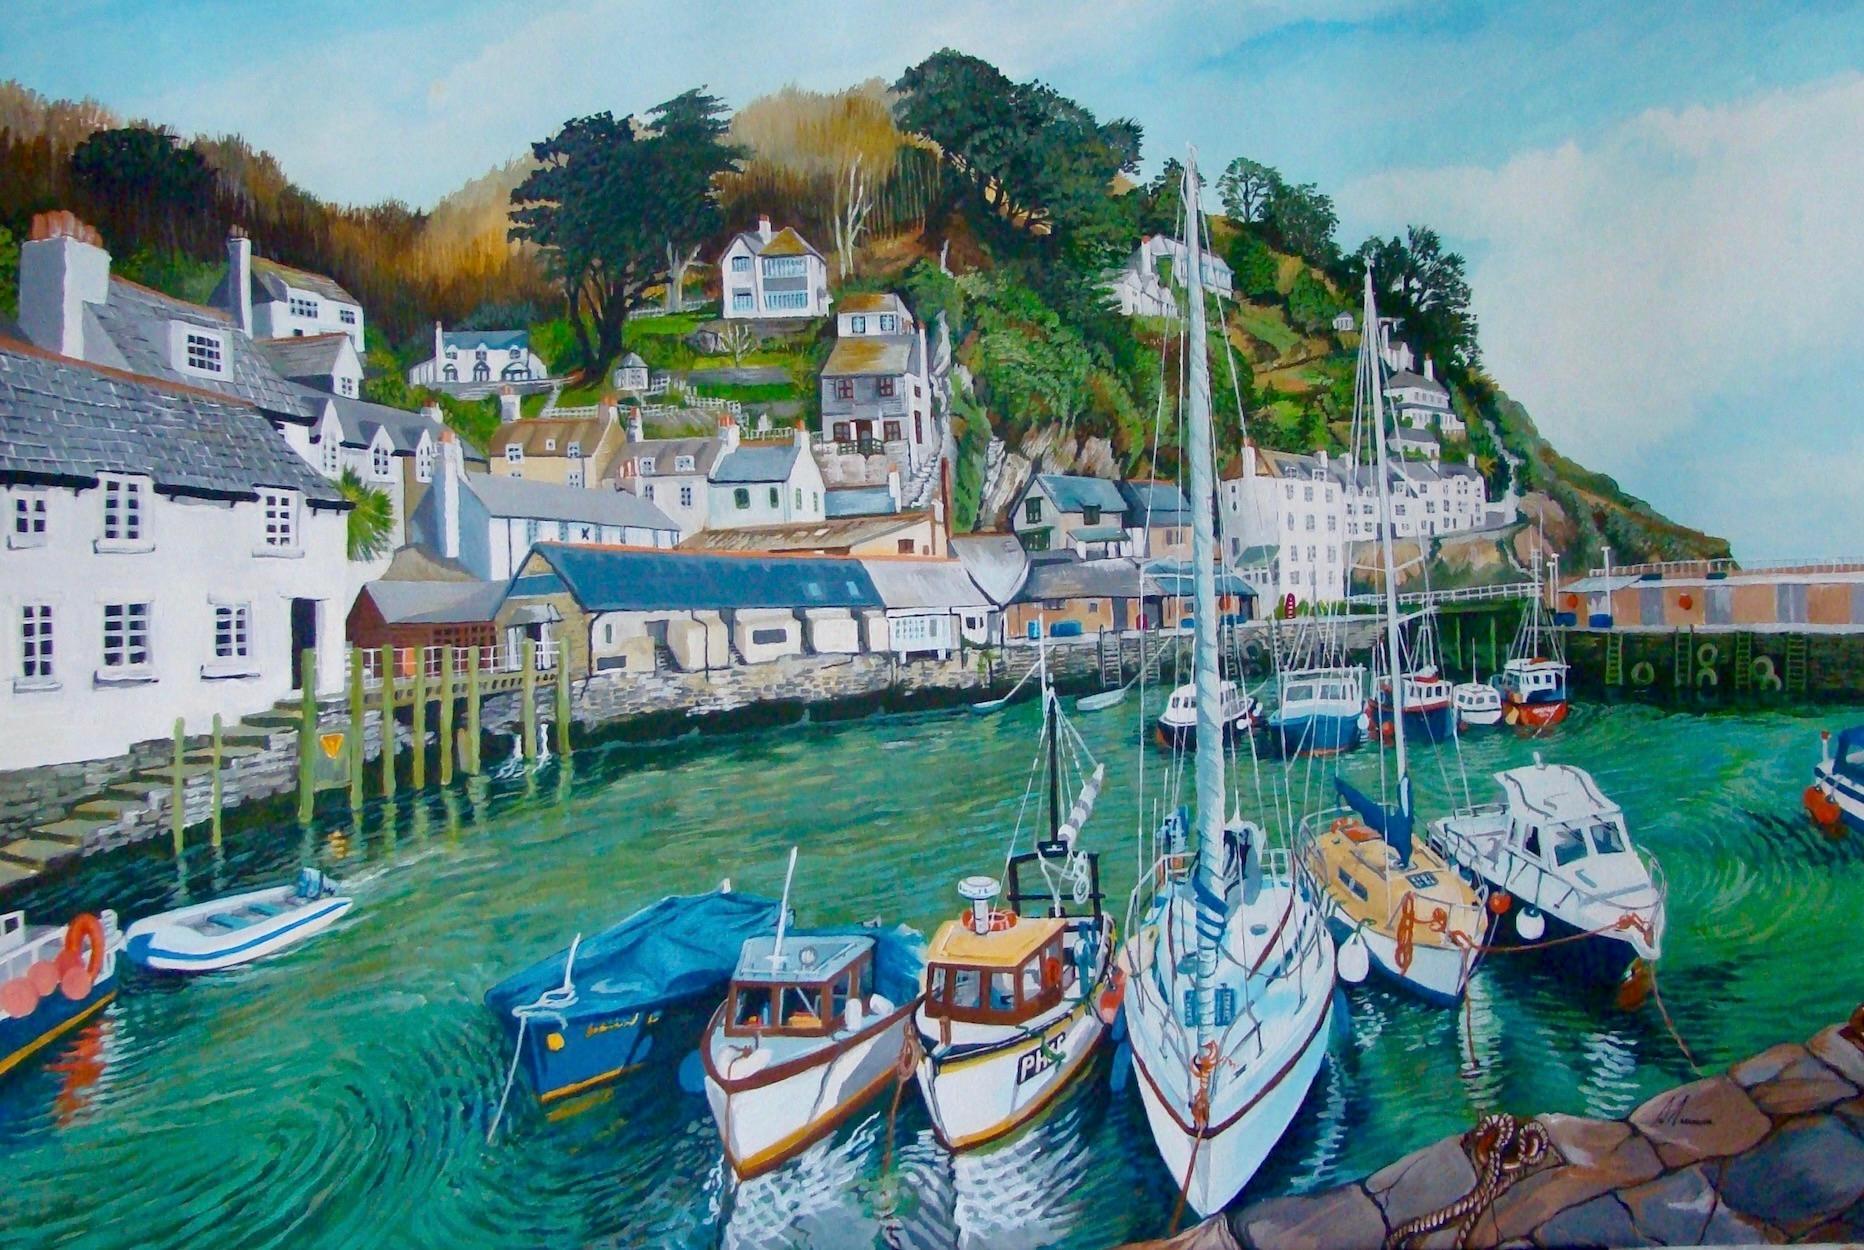 David Truman Landscape Painting - Polperro, Realist Style Cornish Seascape Painting, Traditional Harbour Painting